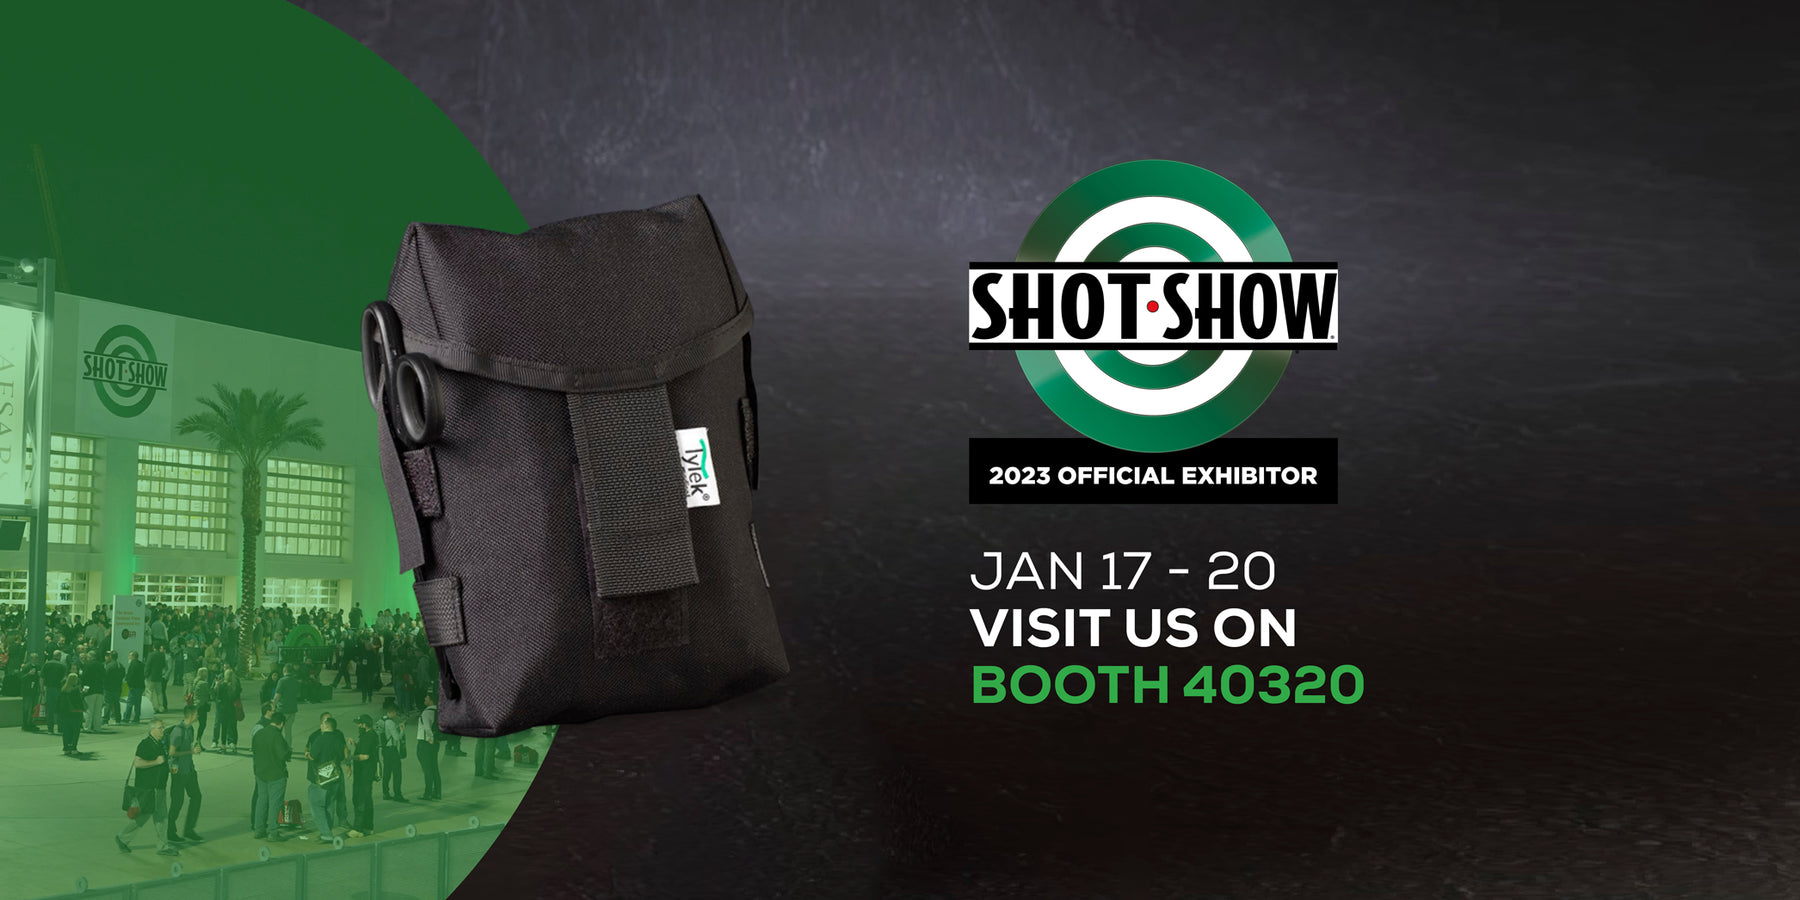 Here’s what to expect at SHOT Show 2023: and TyTek Medical will be there!